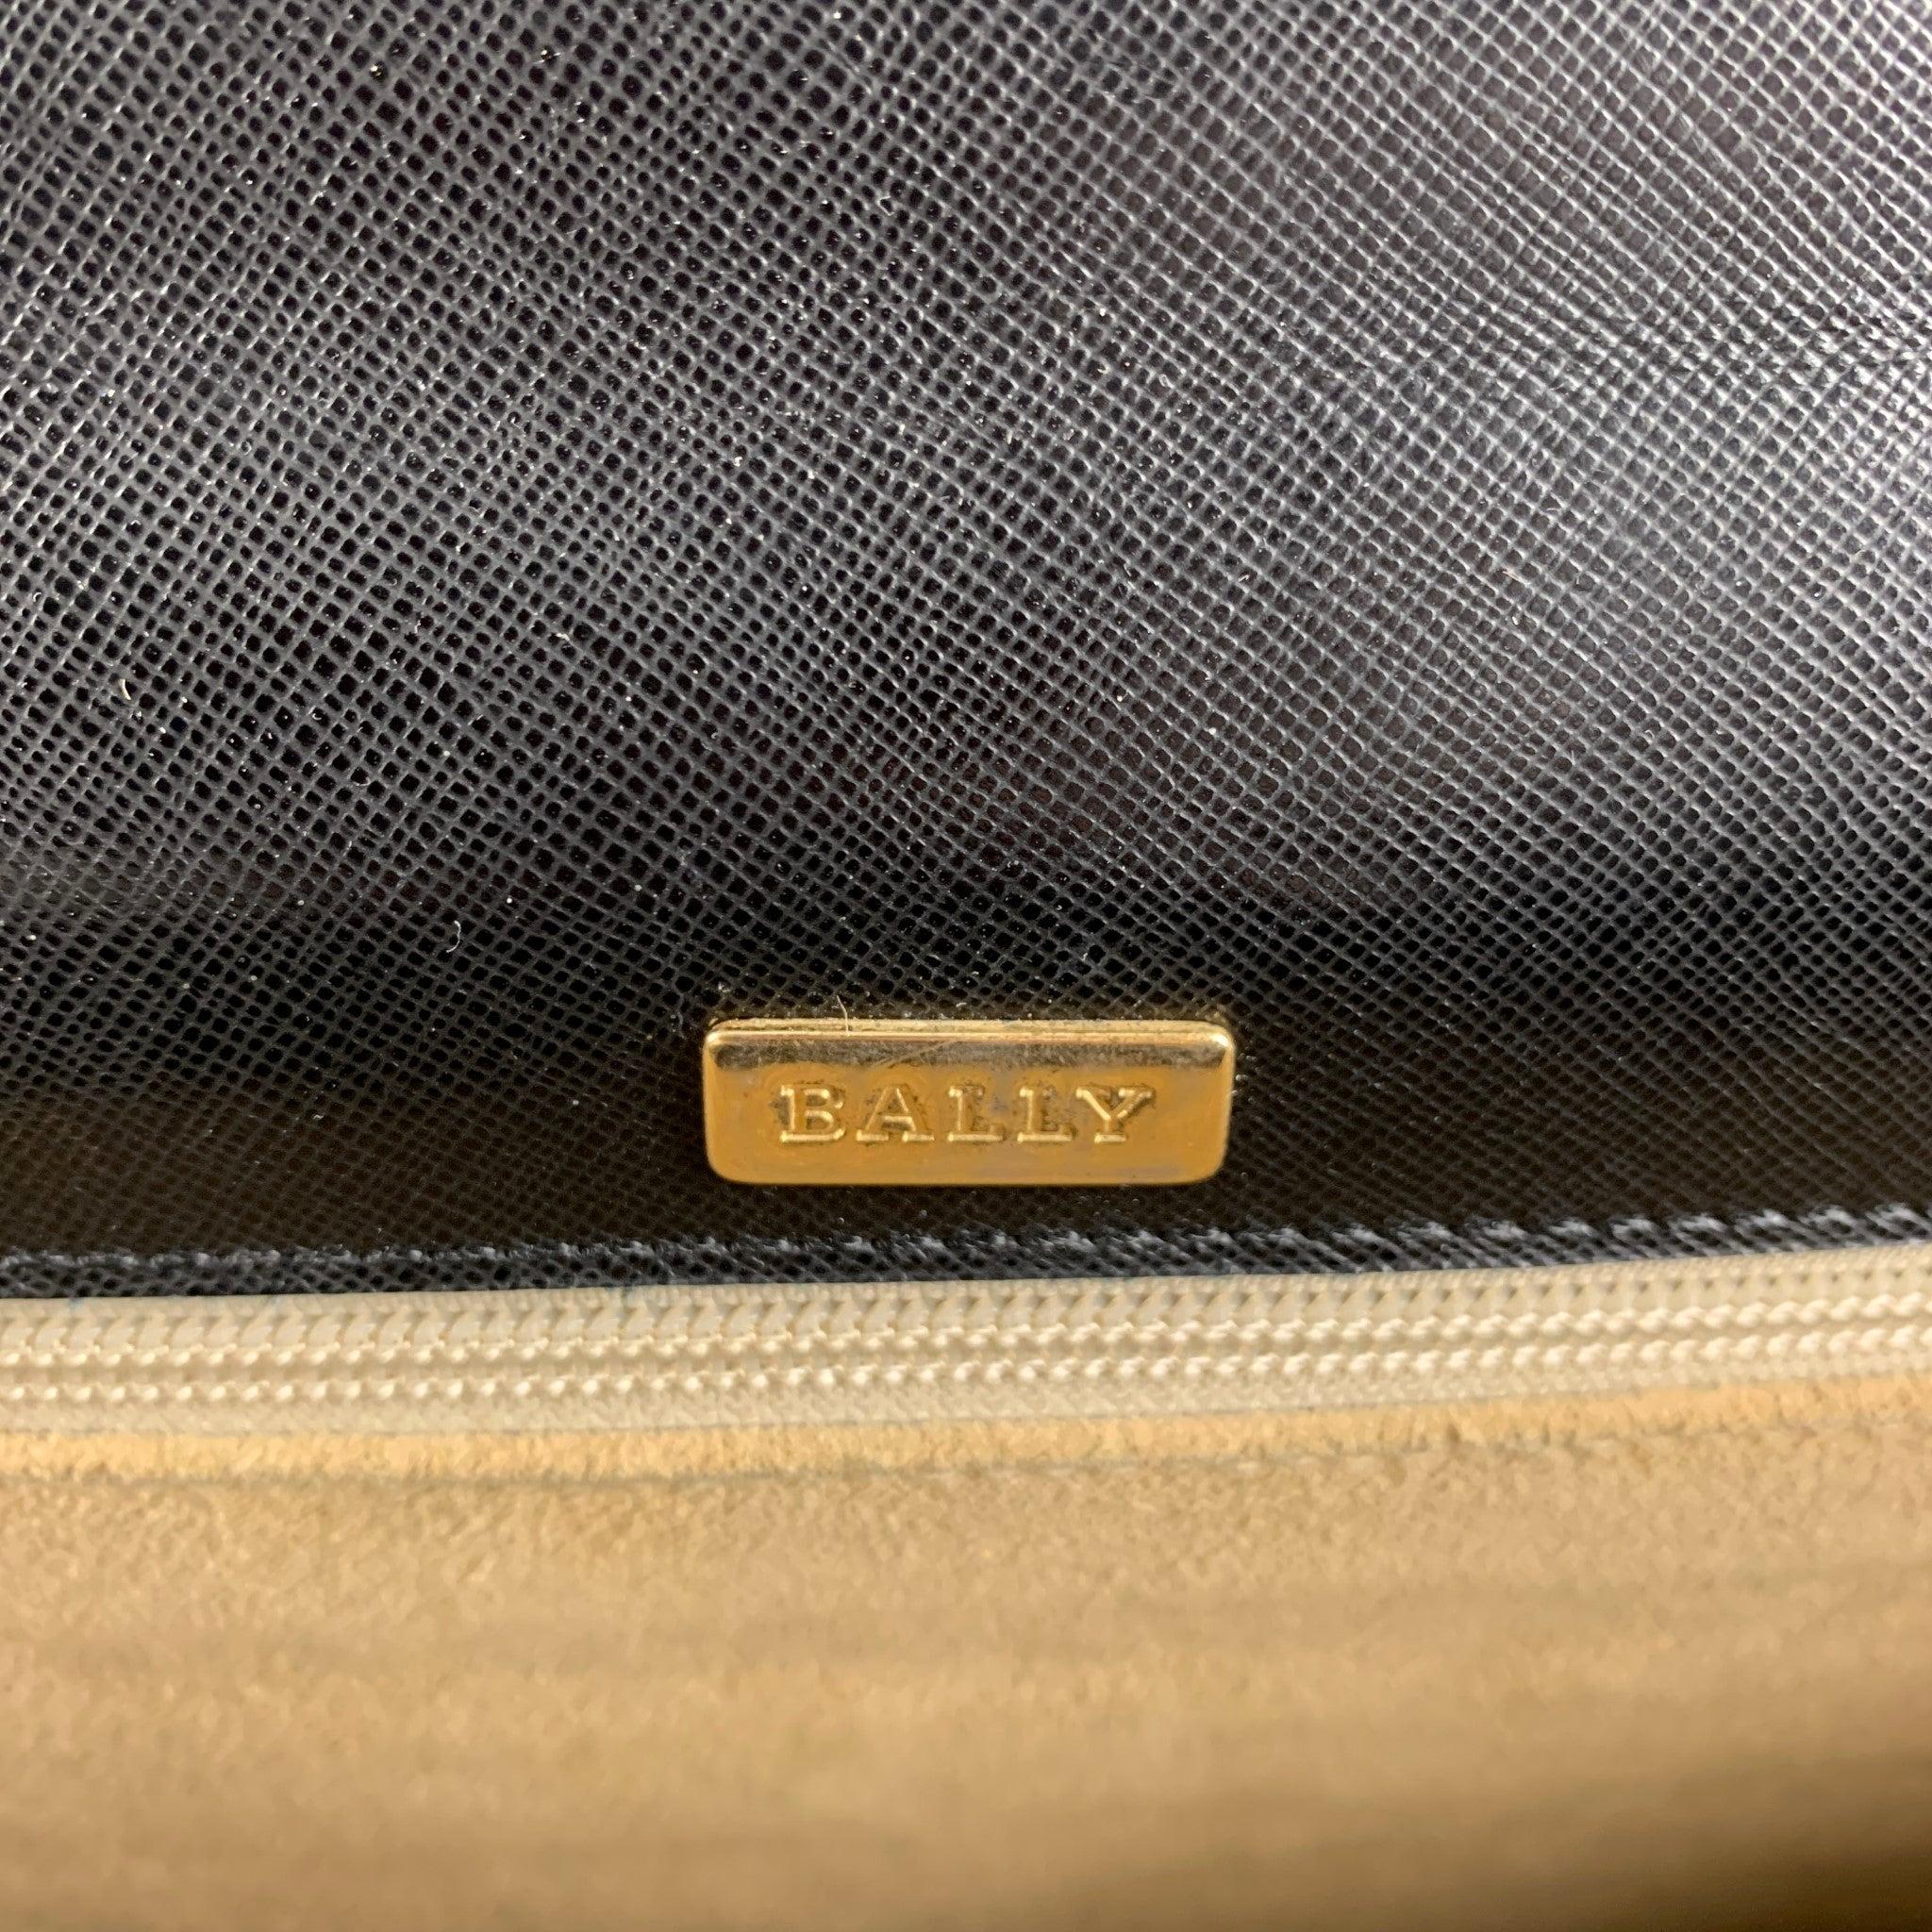 BALLY Black Leather Briefcase Bags For Sale 7